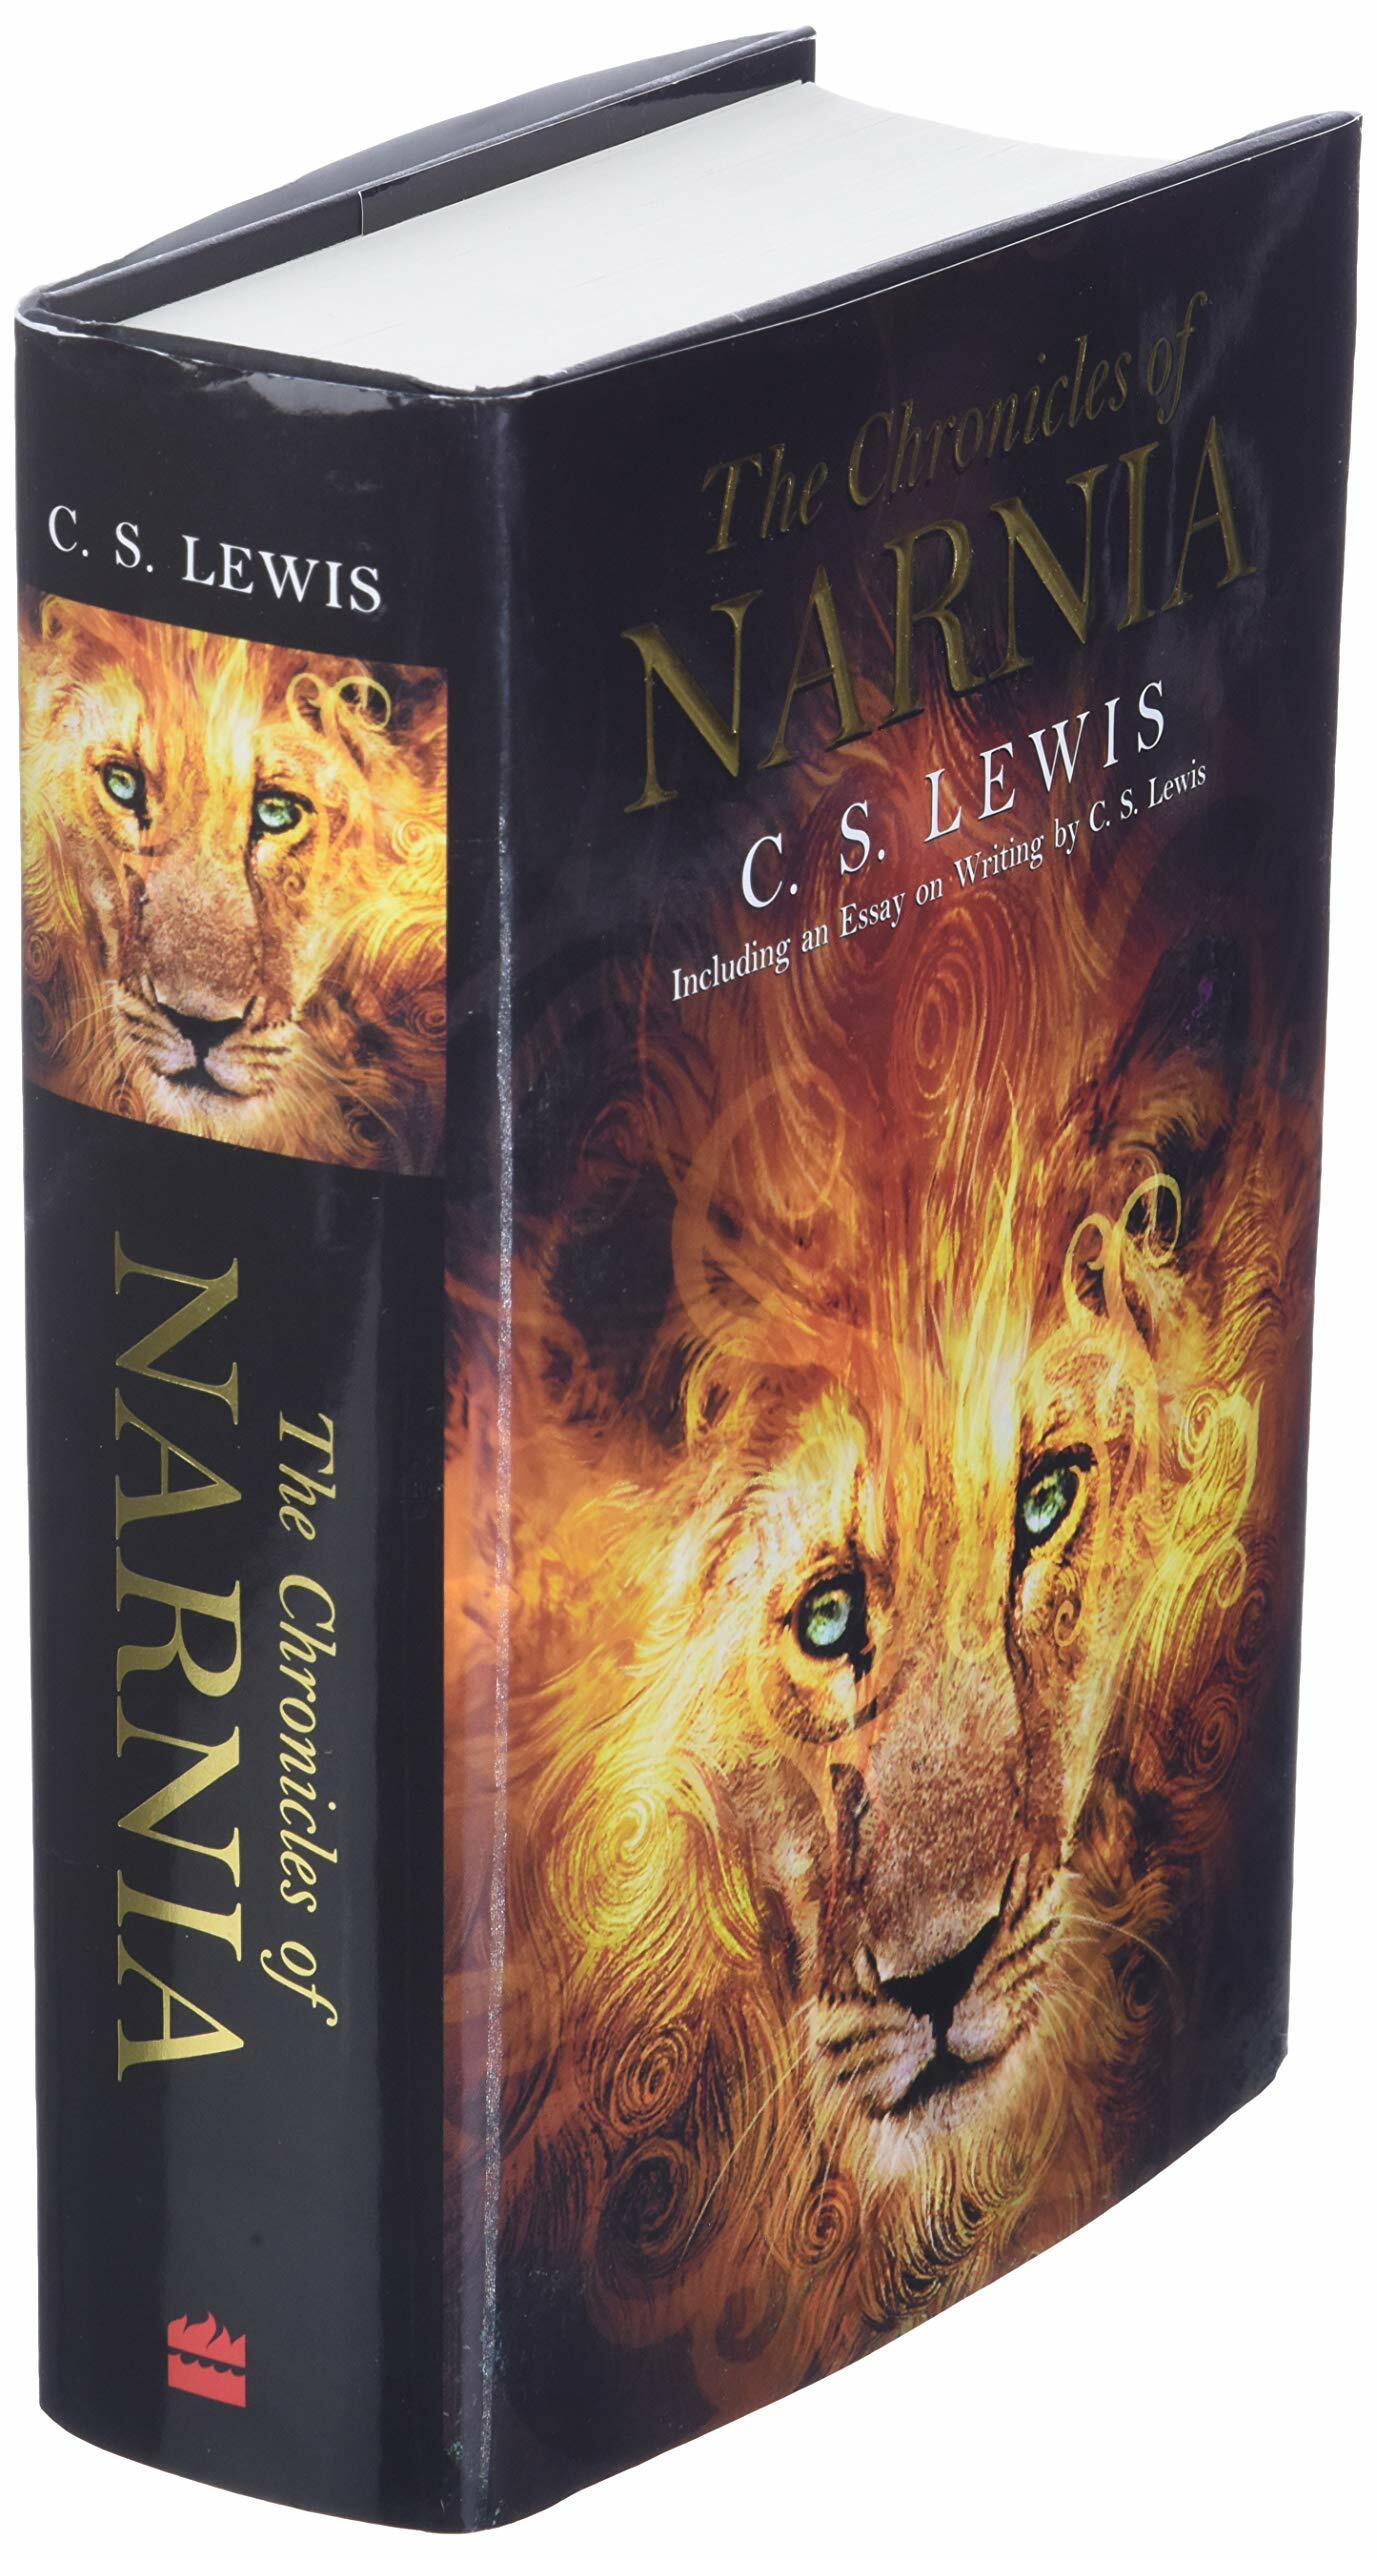 The Chronicles of Narnia: 7 Books in 1 Hardcover (Hardcover)